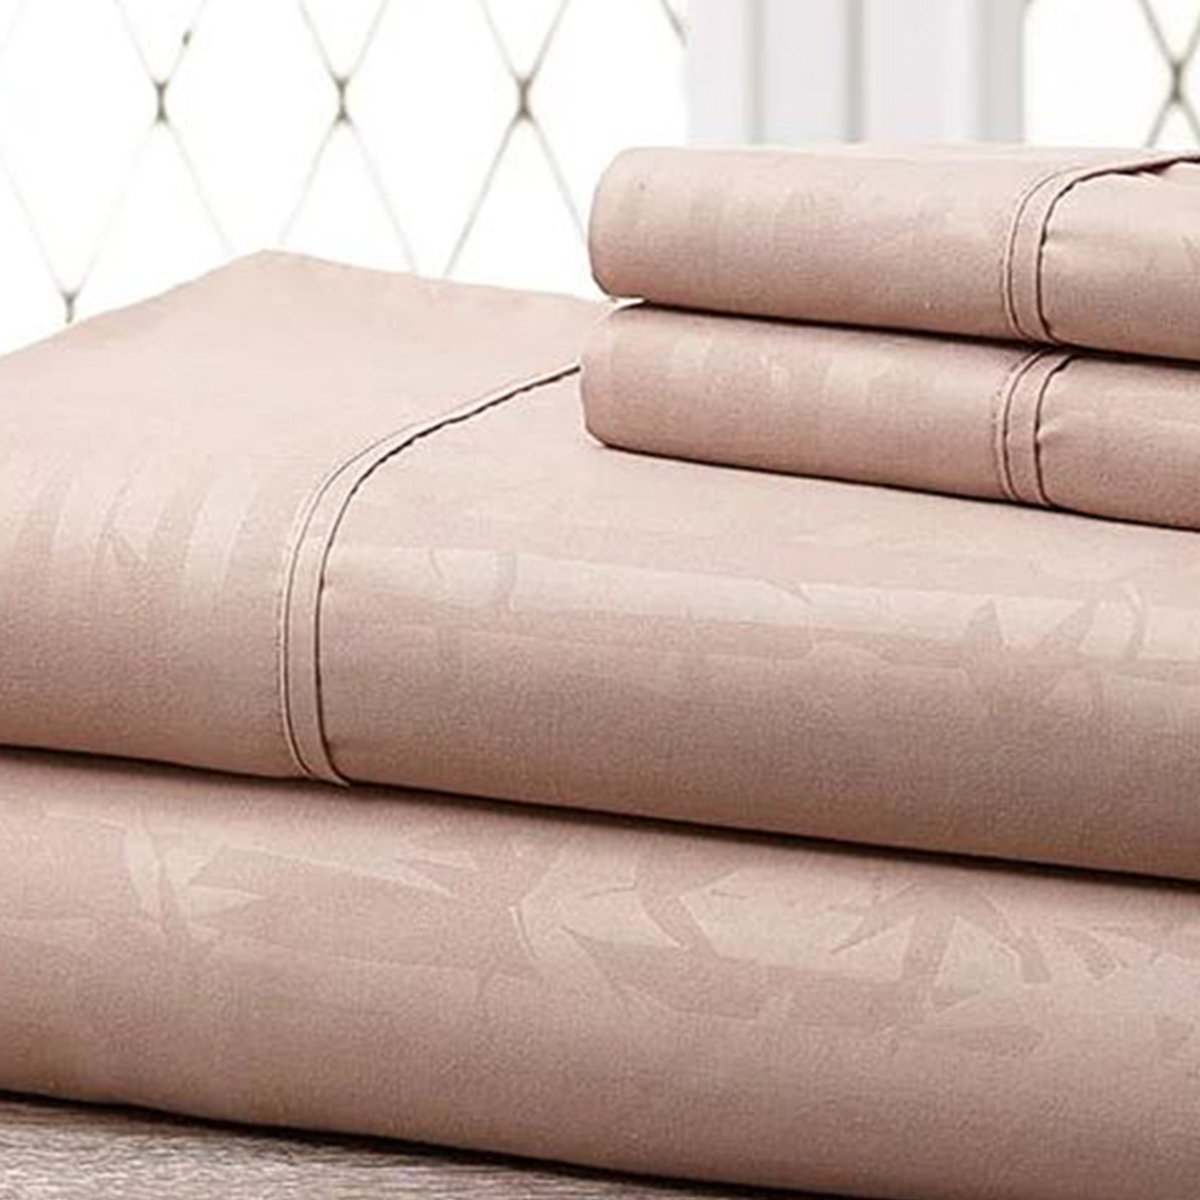 Hny-4pc-eb-cha-f Super-soft 1600 Series Bamboo Embossed Bed Sheet, Champagne - Full, 4 Piece